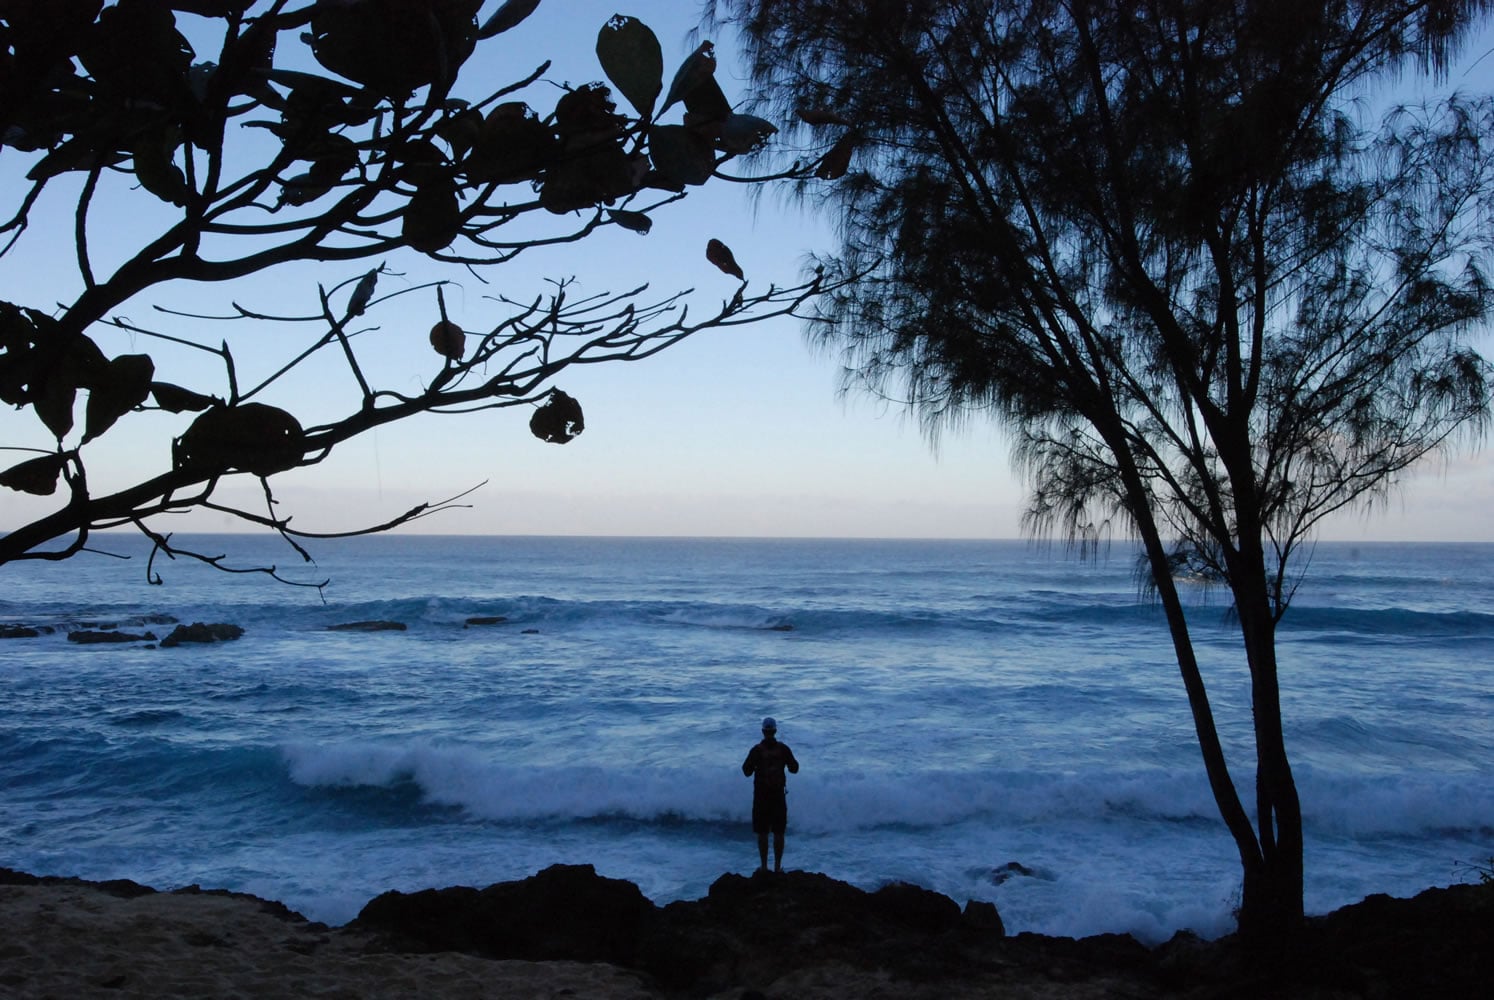 A man watches the ocean Wednesday near Waimea Bay, Hawaii. Spectators packed the beach before dawn for a big-wave surfing competition, but the waves weren&#039;t big enough for the event to go ahead.